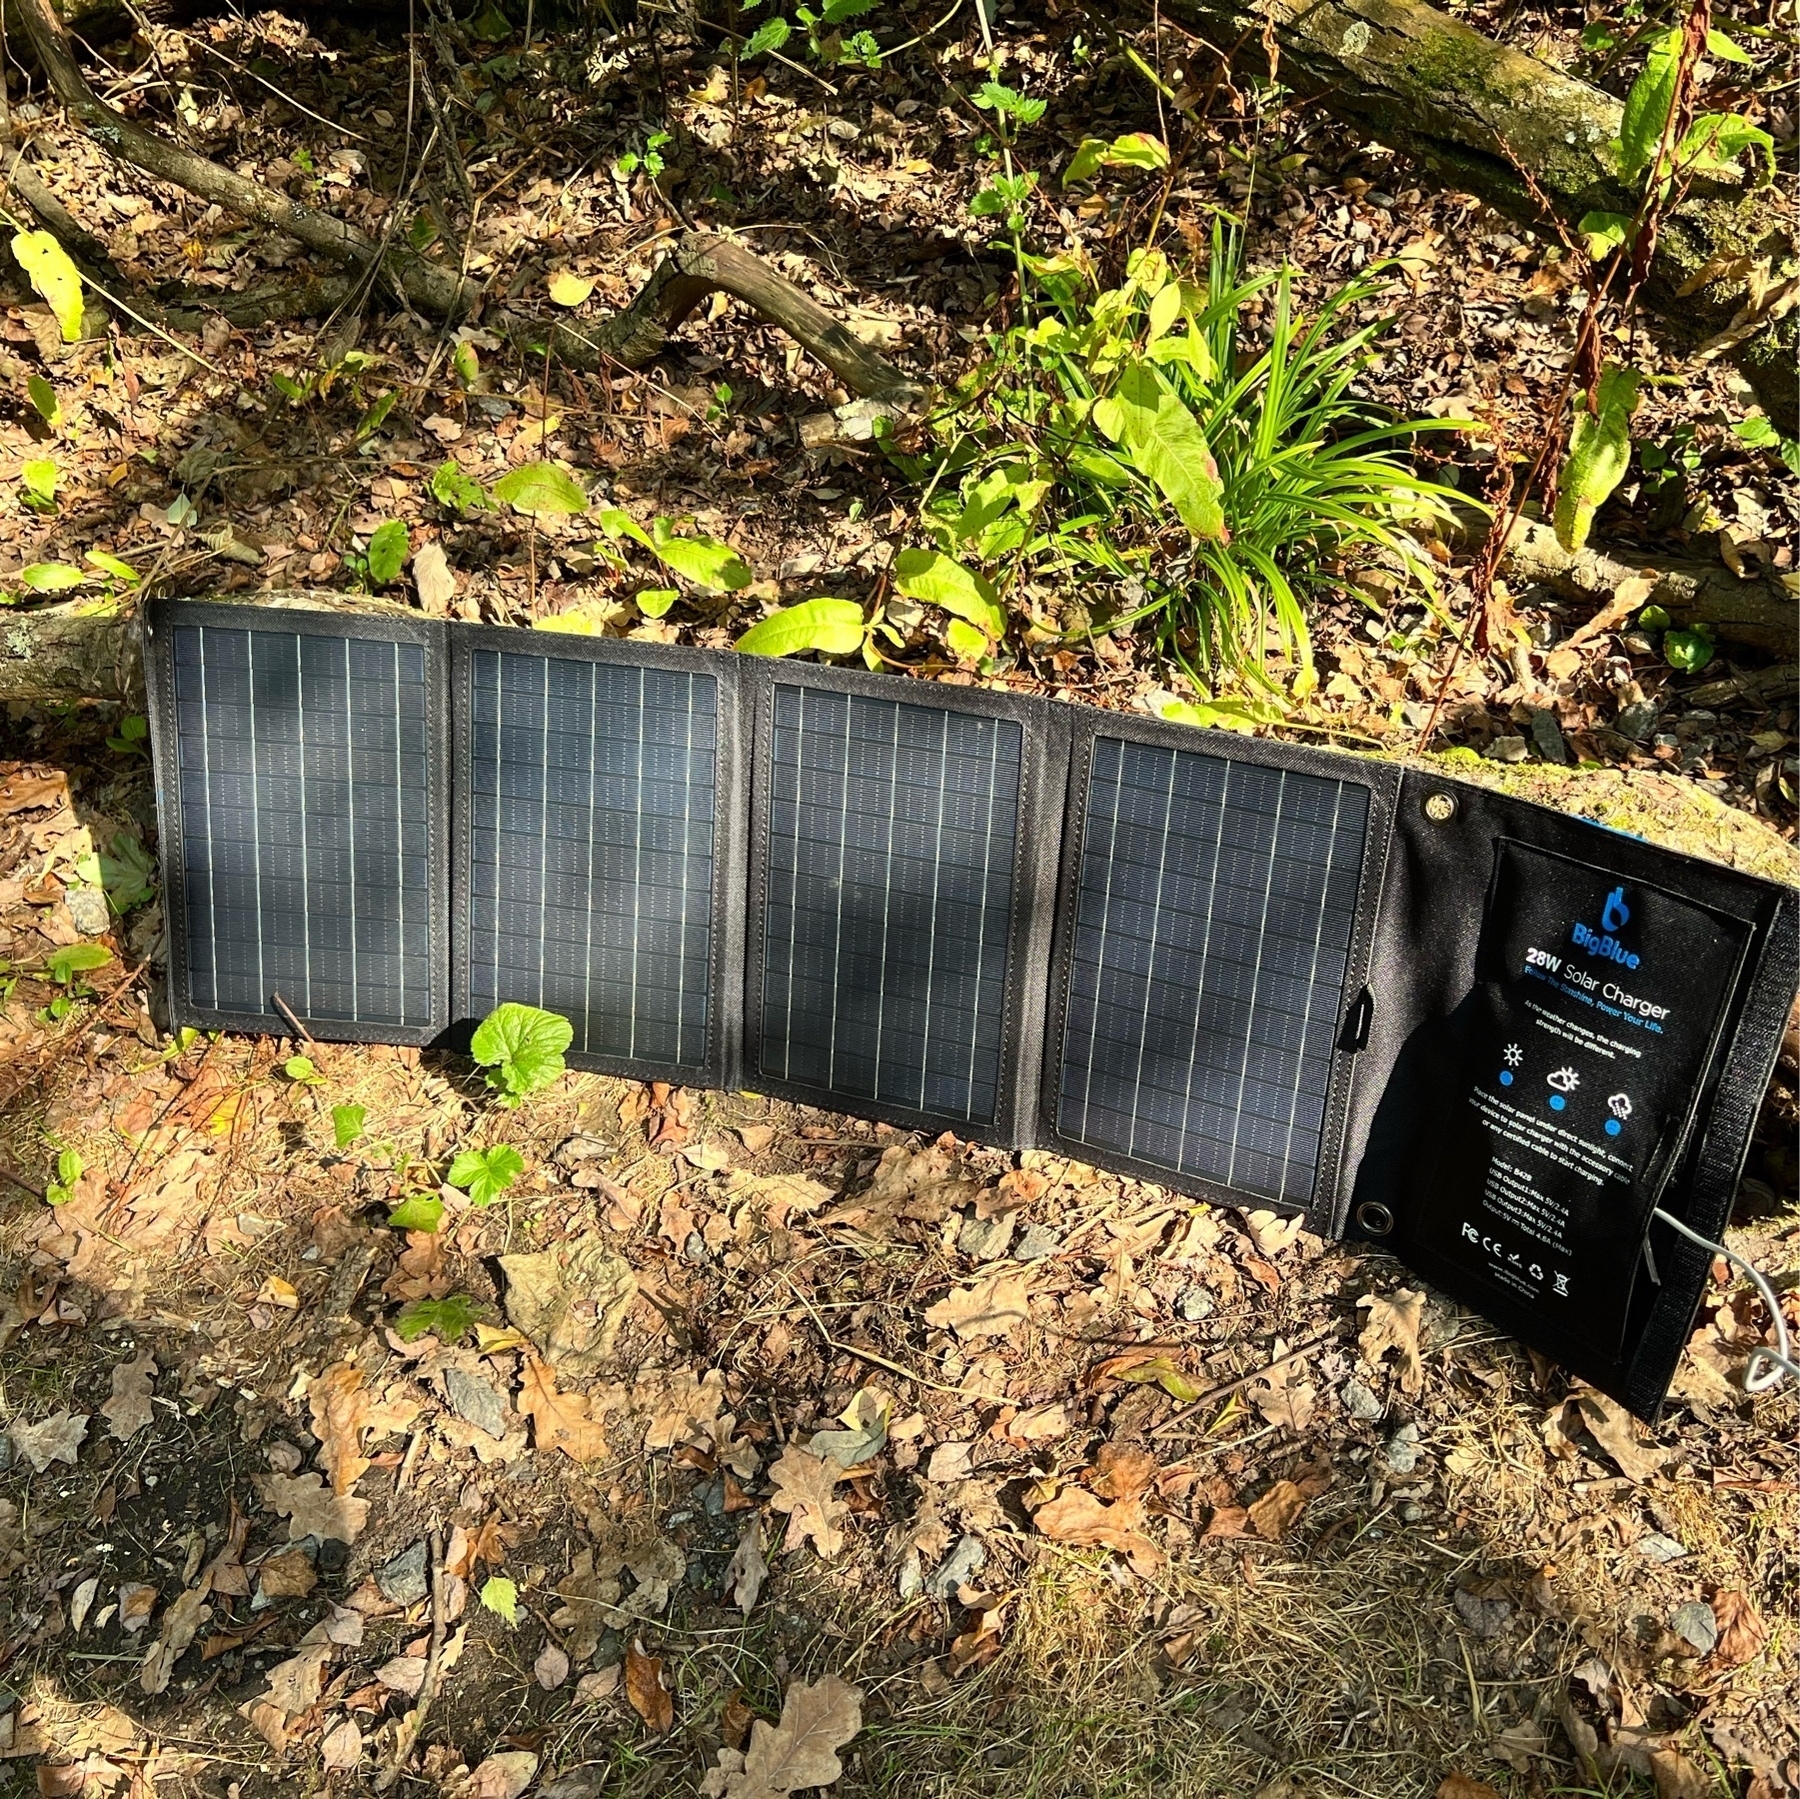 charging an iphone from solar panels. 